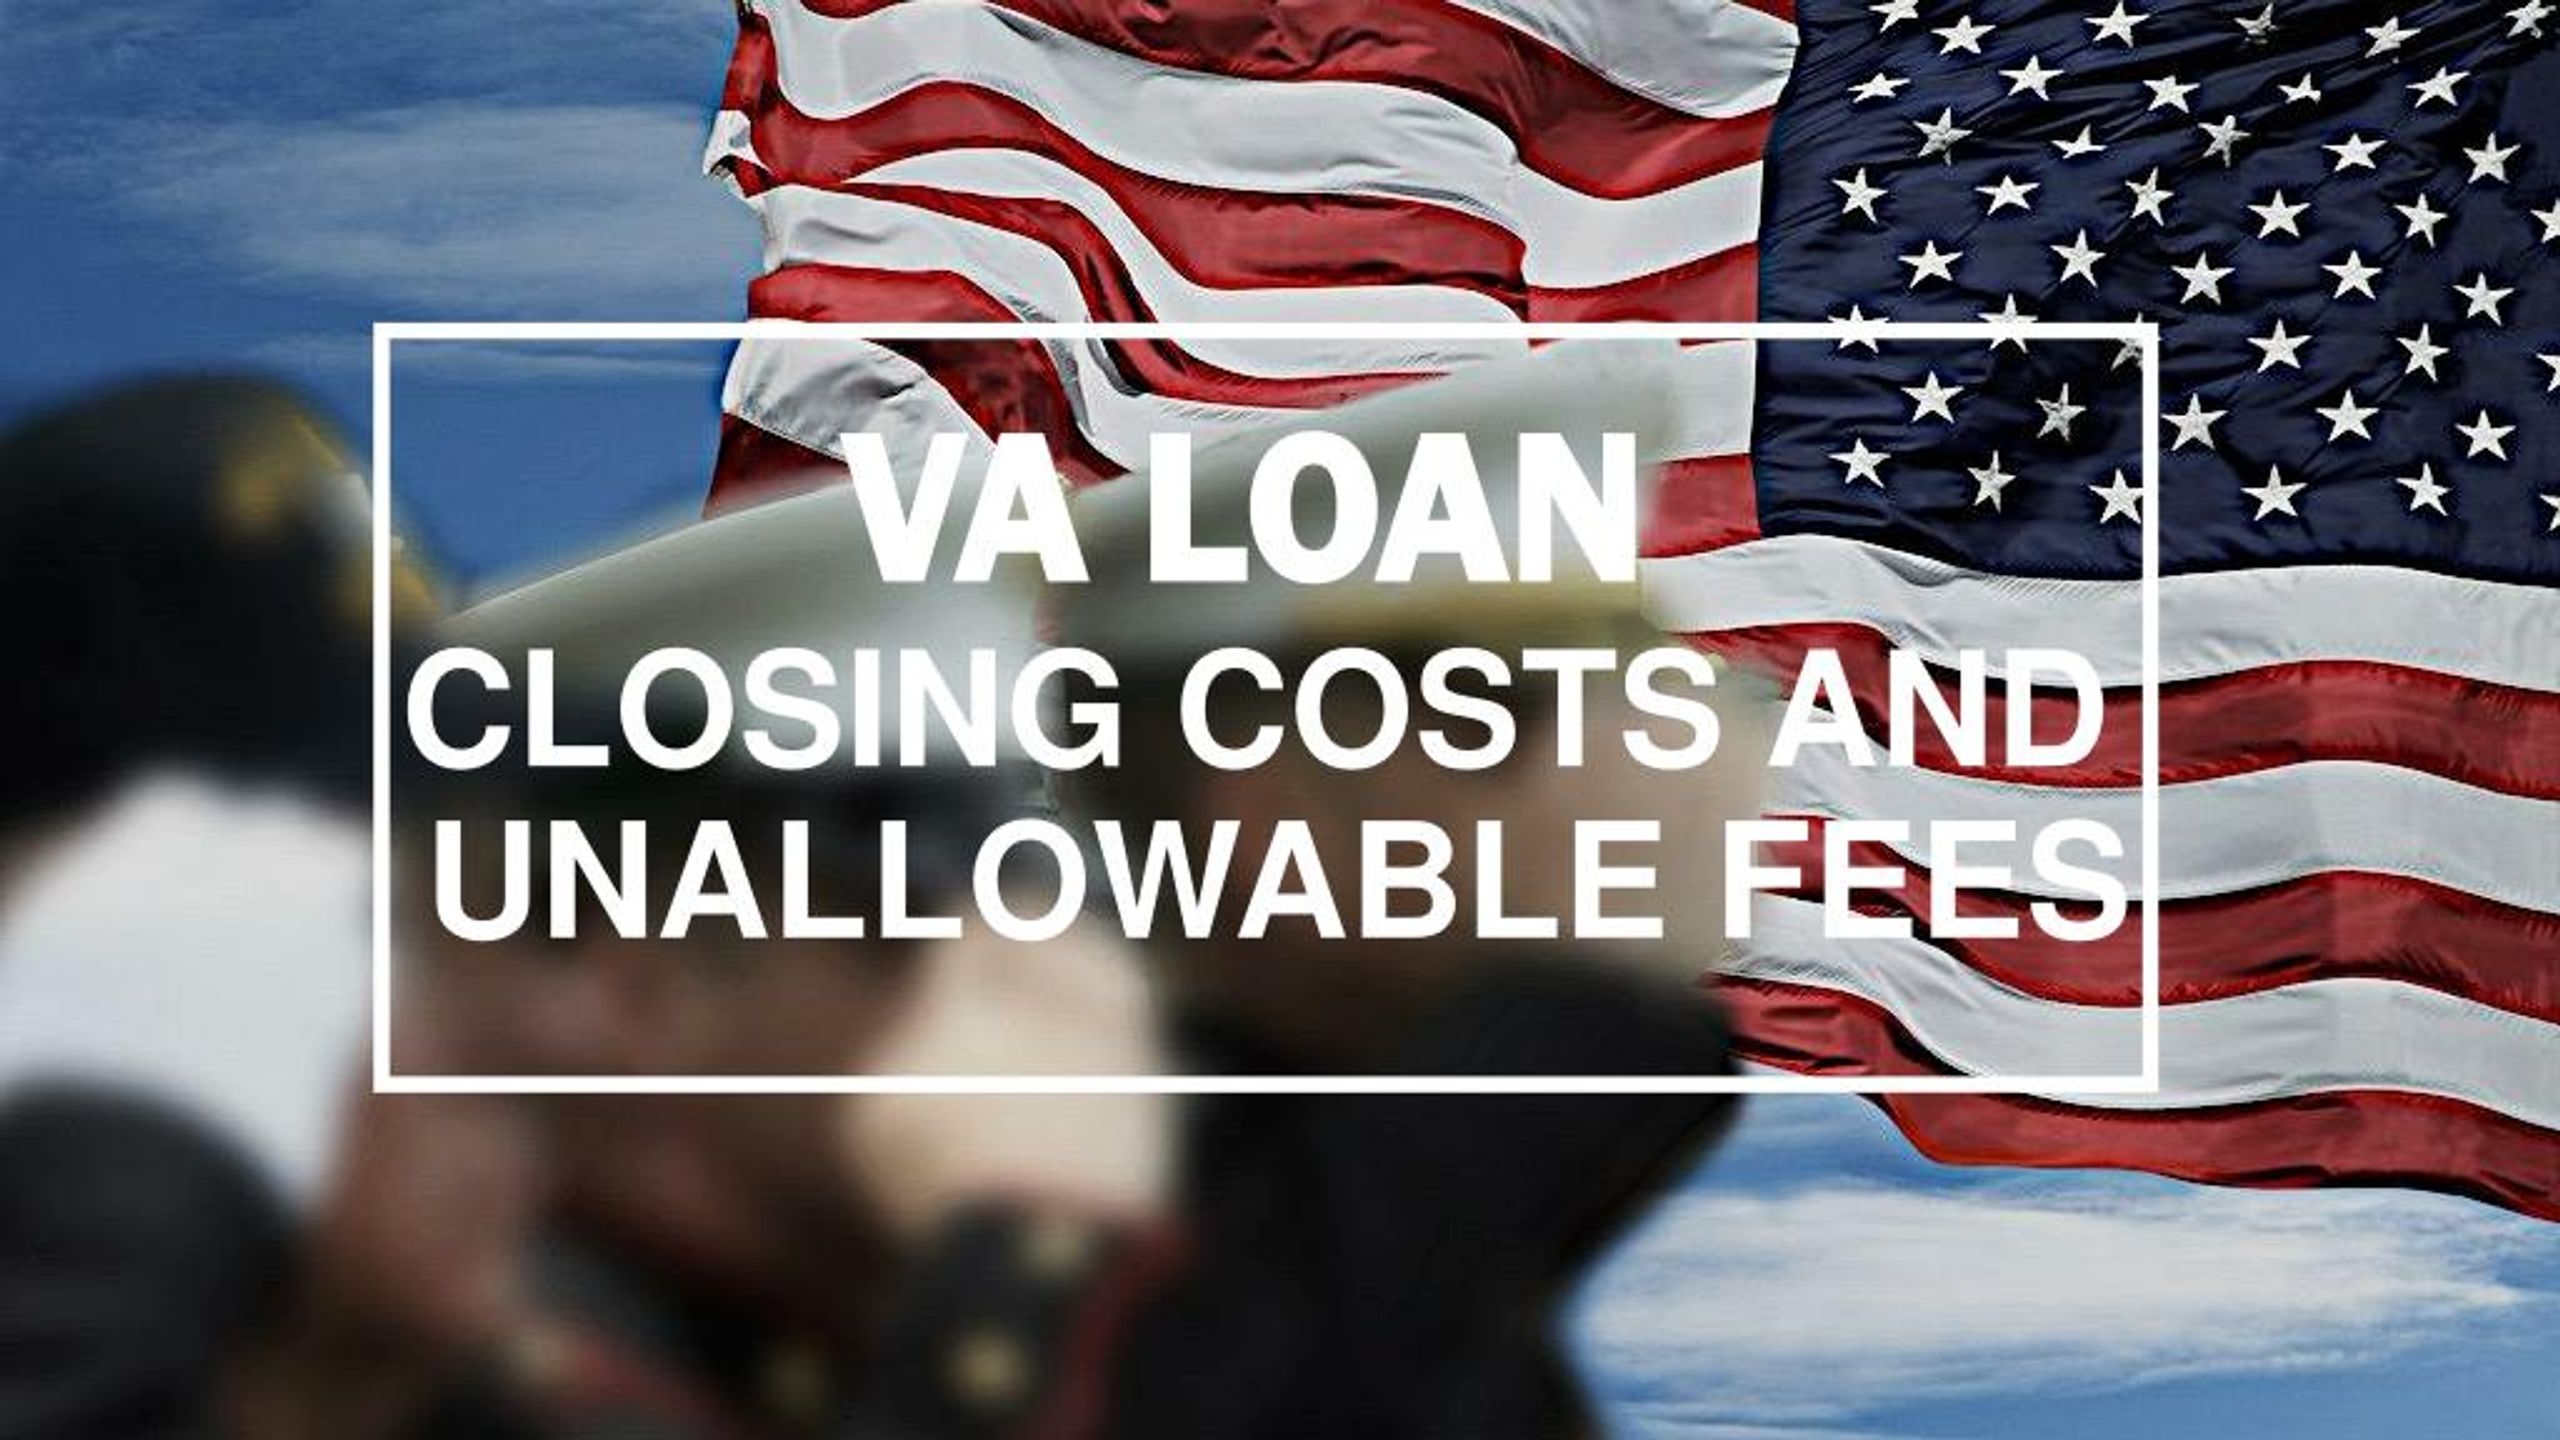 PPT VA Loan Closing Costs And Unallowable Fees PowerPoint